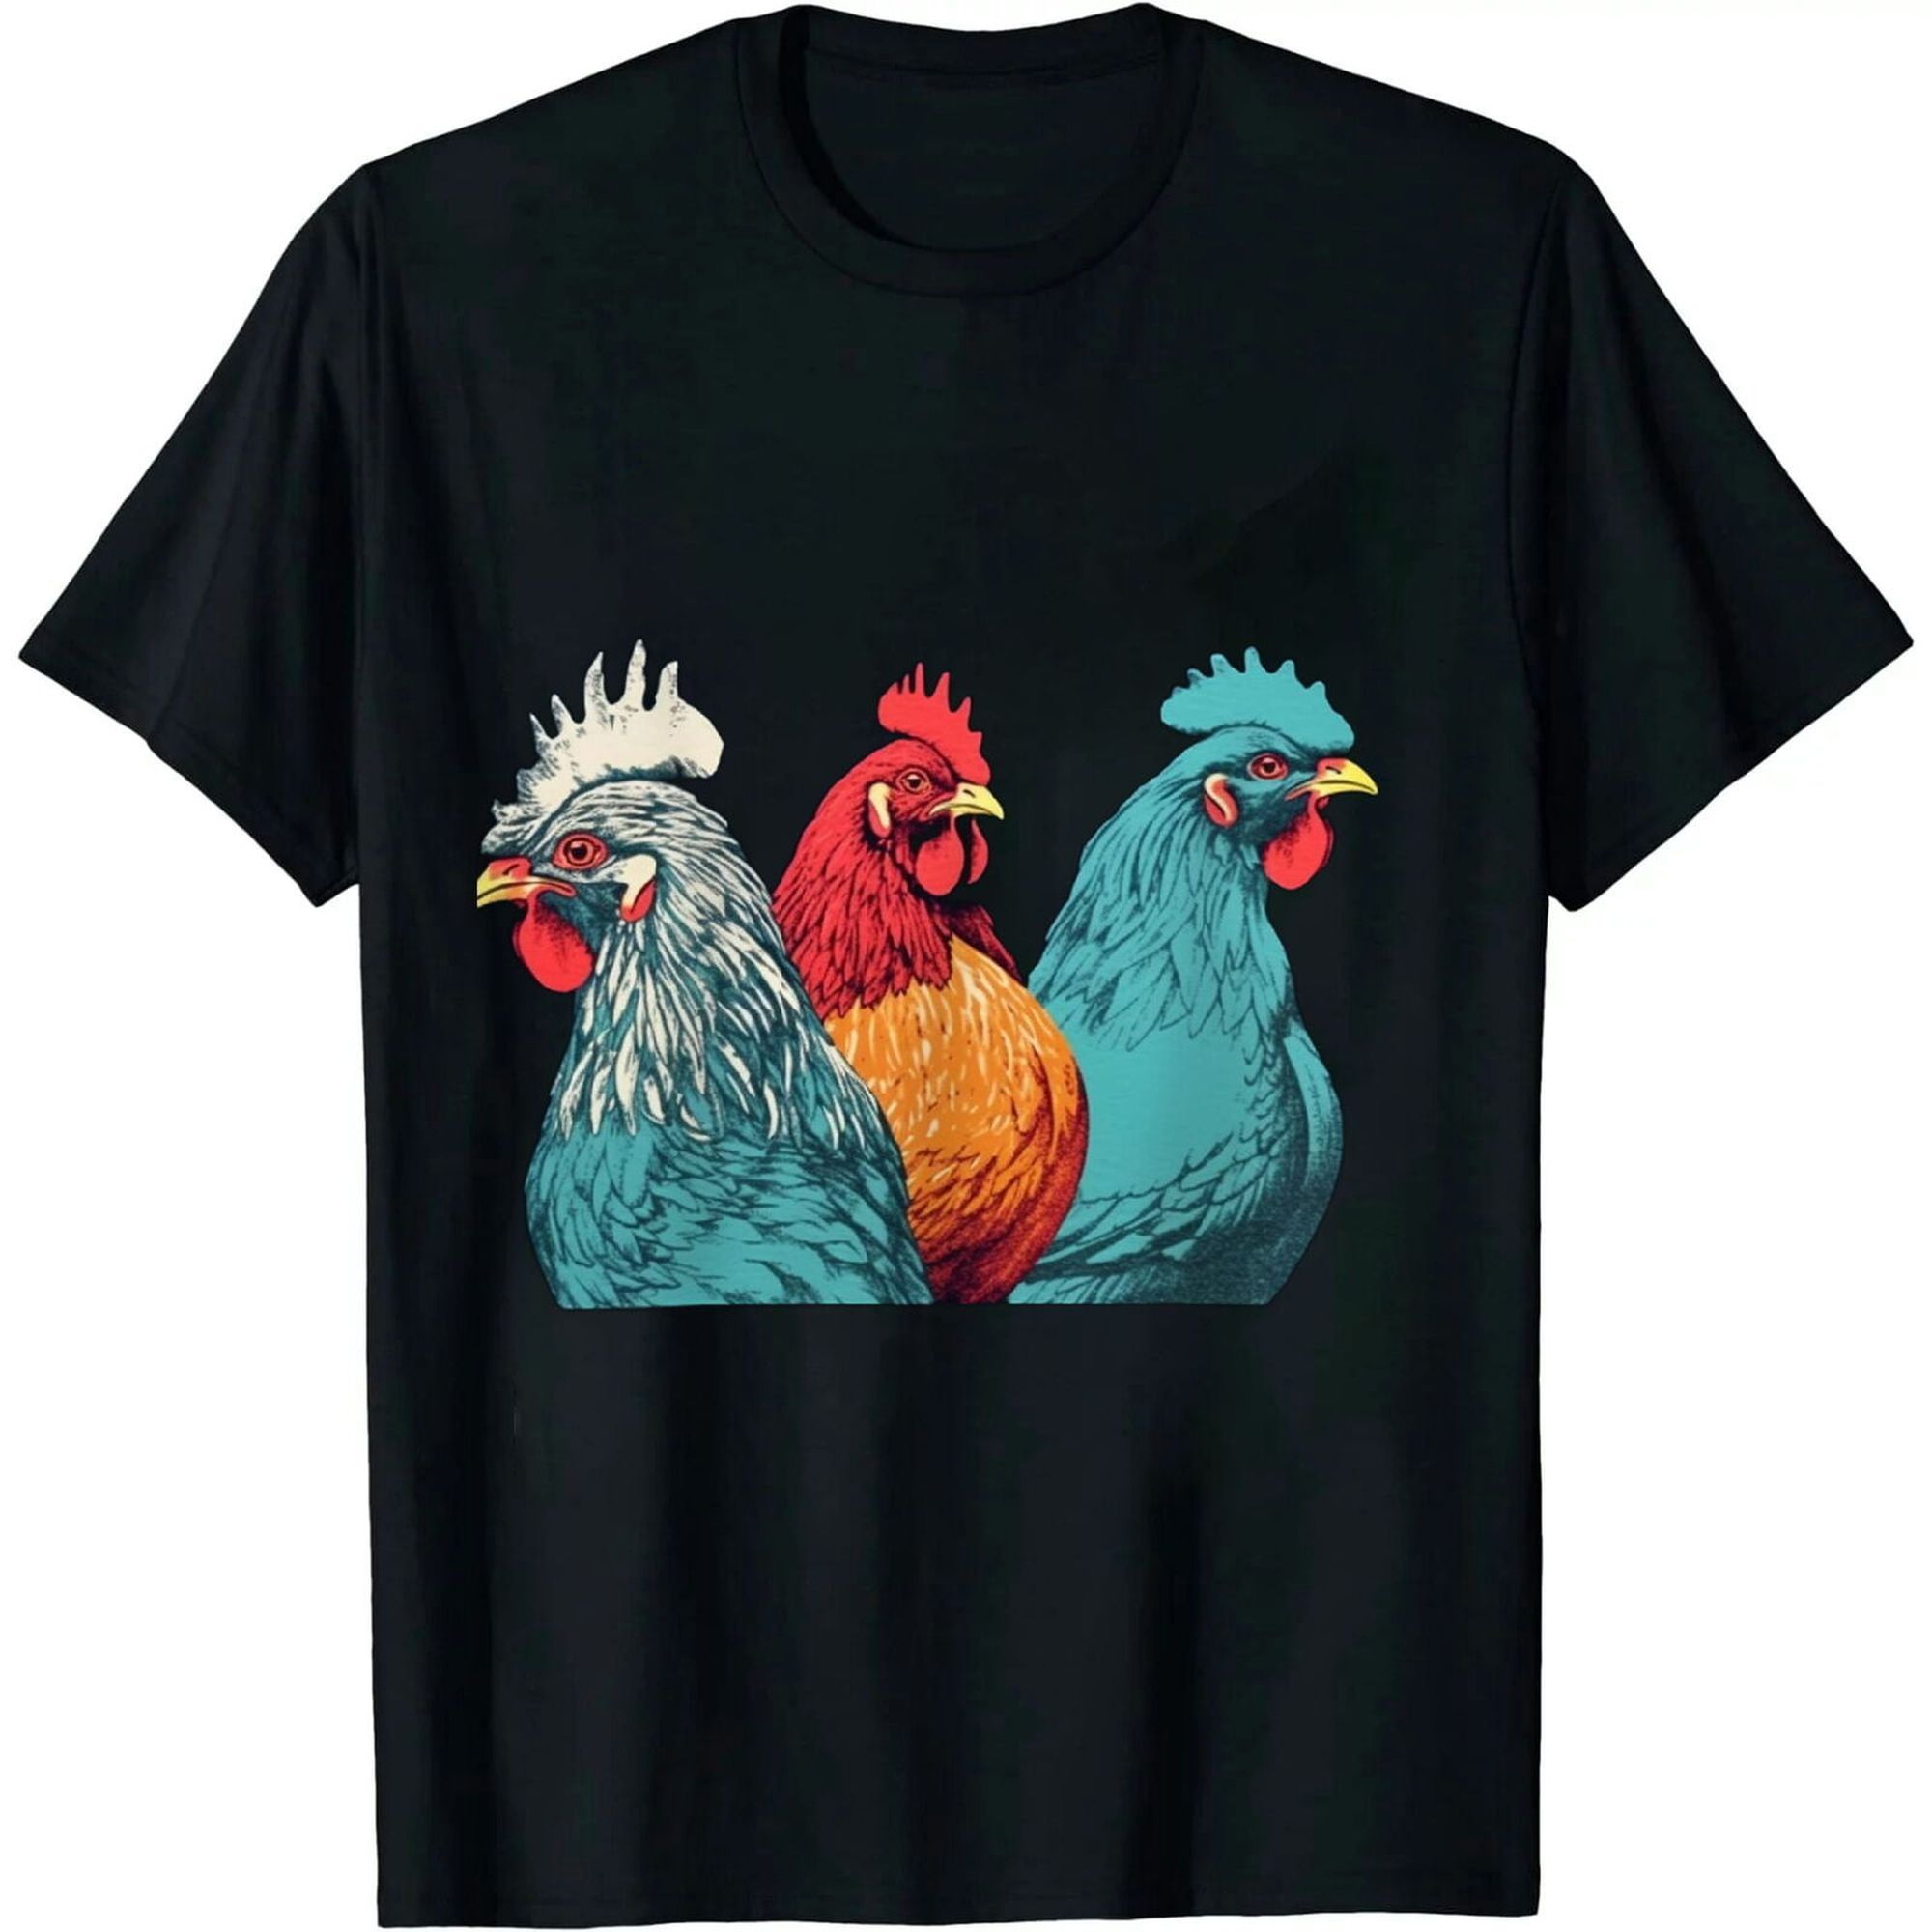 Cluckin' Cute: Women's Chicken Shirt with Funny Graphic - Perfect for ...